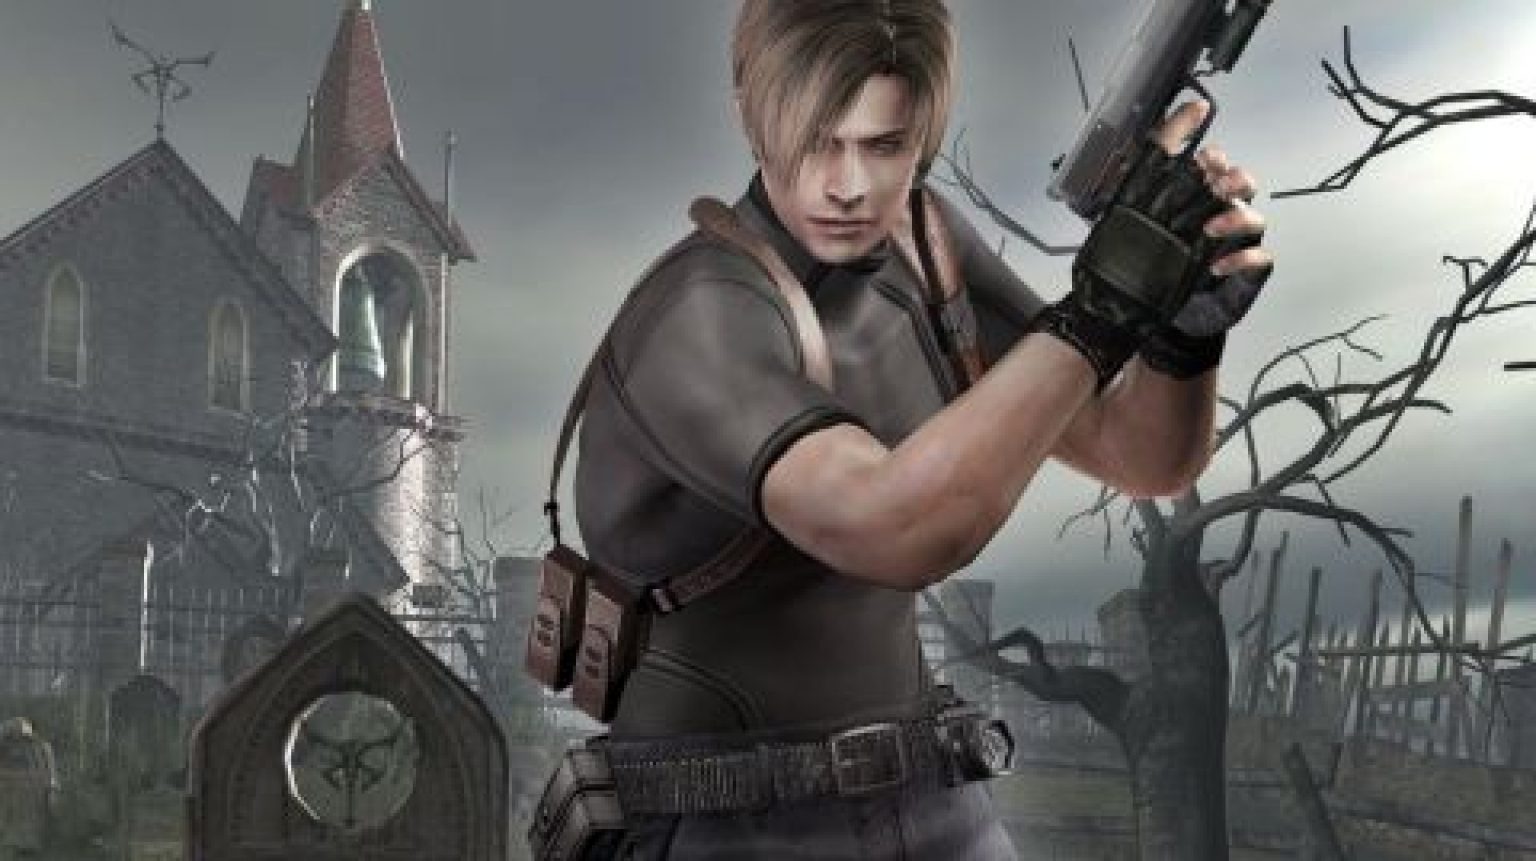 resident evil 4 pc game download winrar